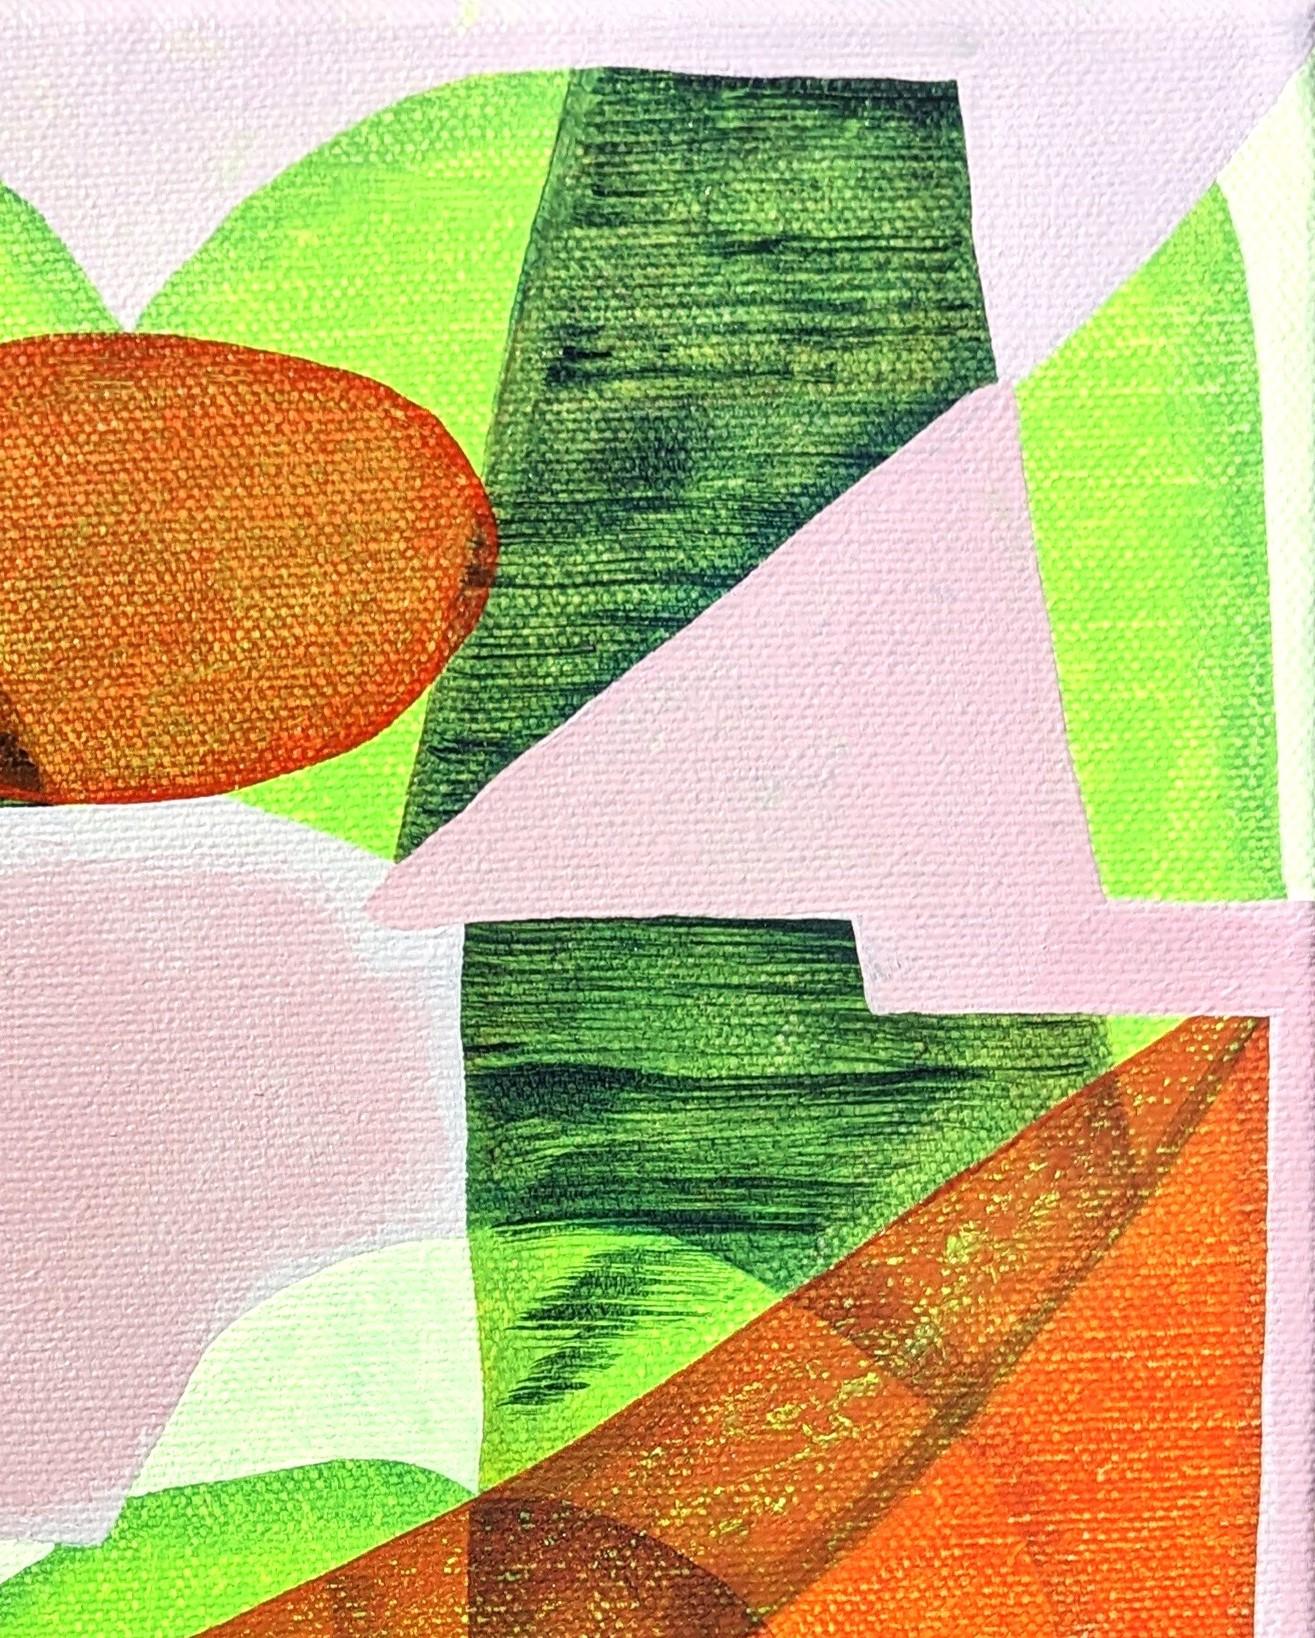 Contemporary abstract geometric colorful painting by Texas-based artist Max Manning. The work features organic and geometric shapes in neon green, orange, and purple tones. Signed by the artist on the reverse. Currently unframed, but options are